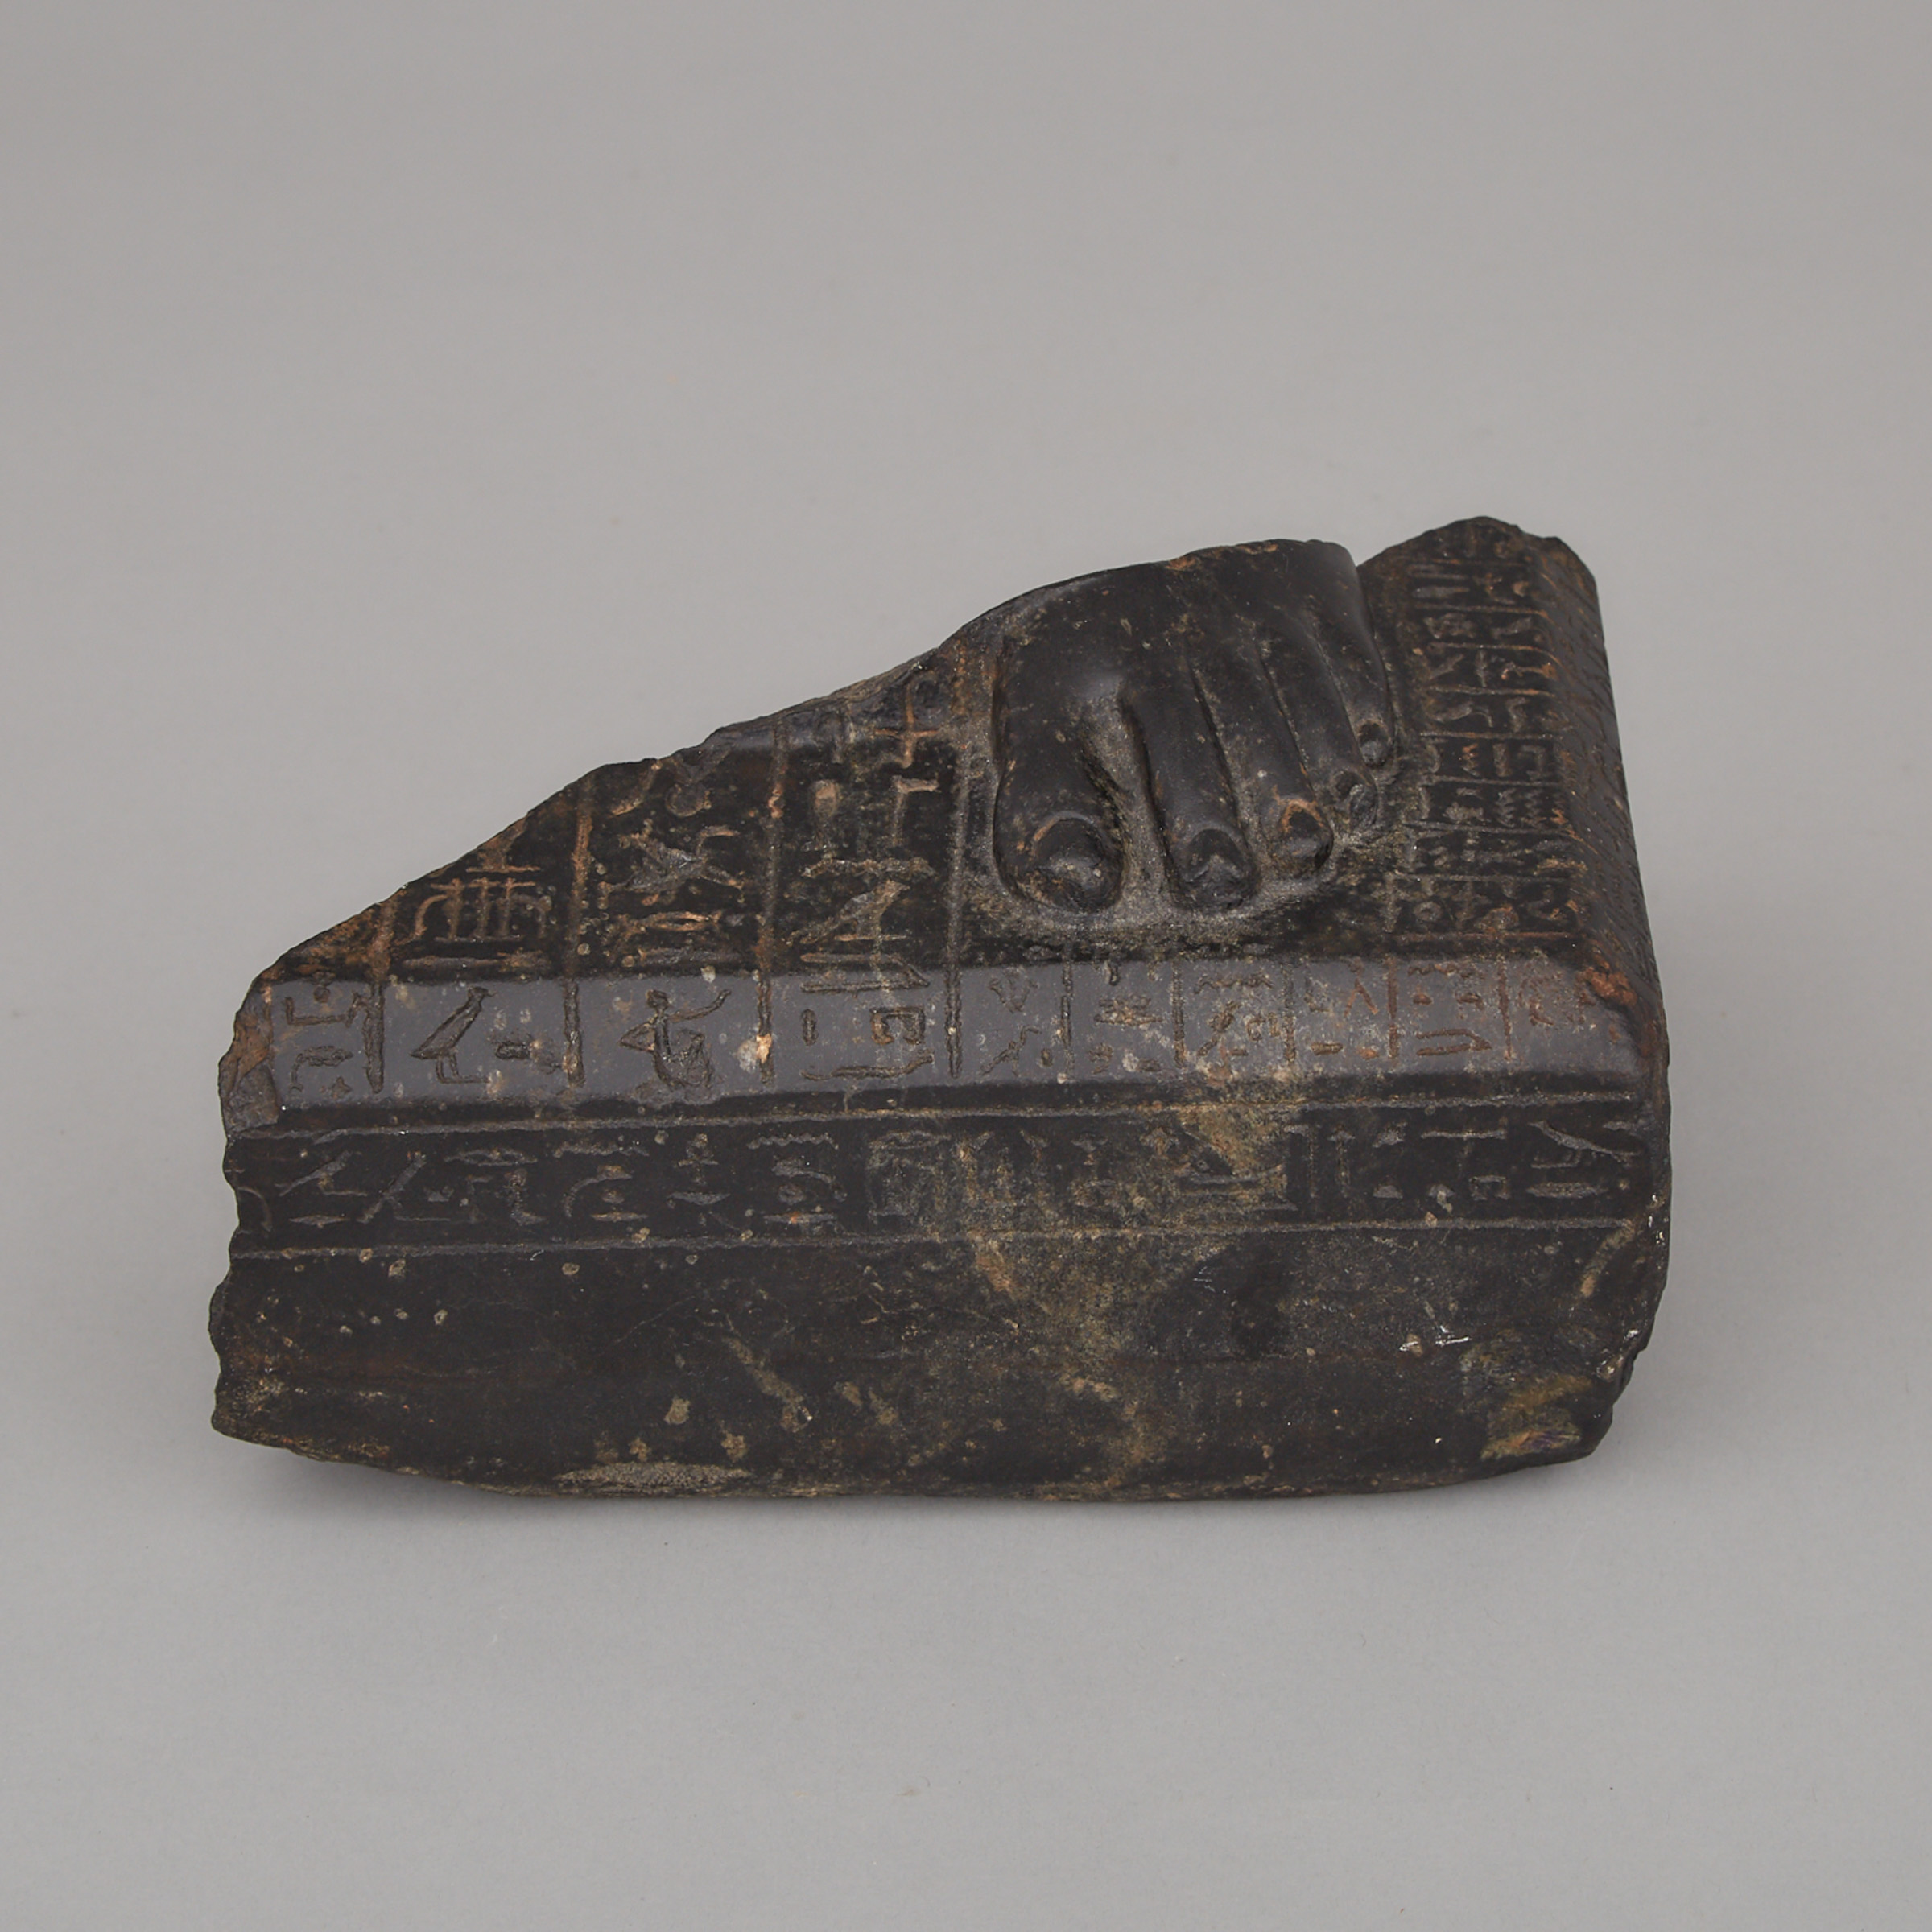 Egyptian Basalt Fragment of a Priest of Horus Healing Statue, Late Period-Ptolemaic Period, 7th-2nd century B.C.